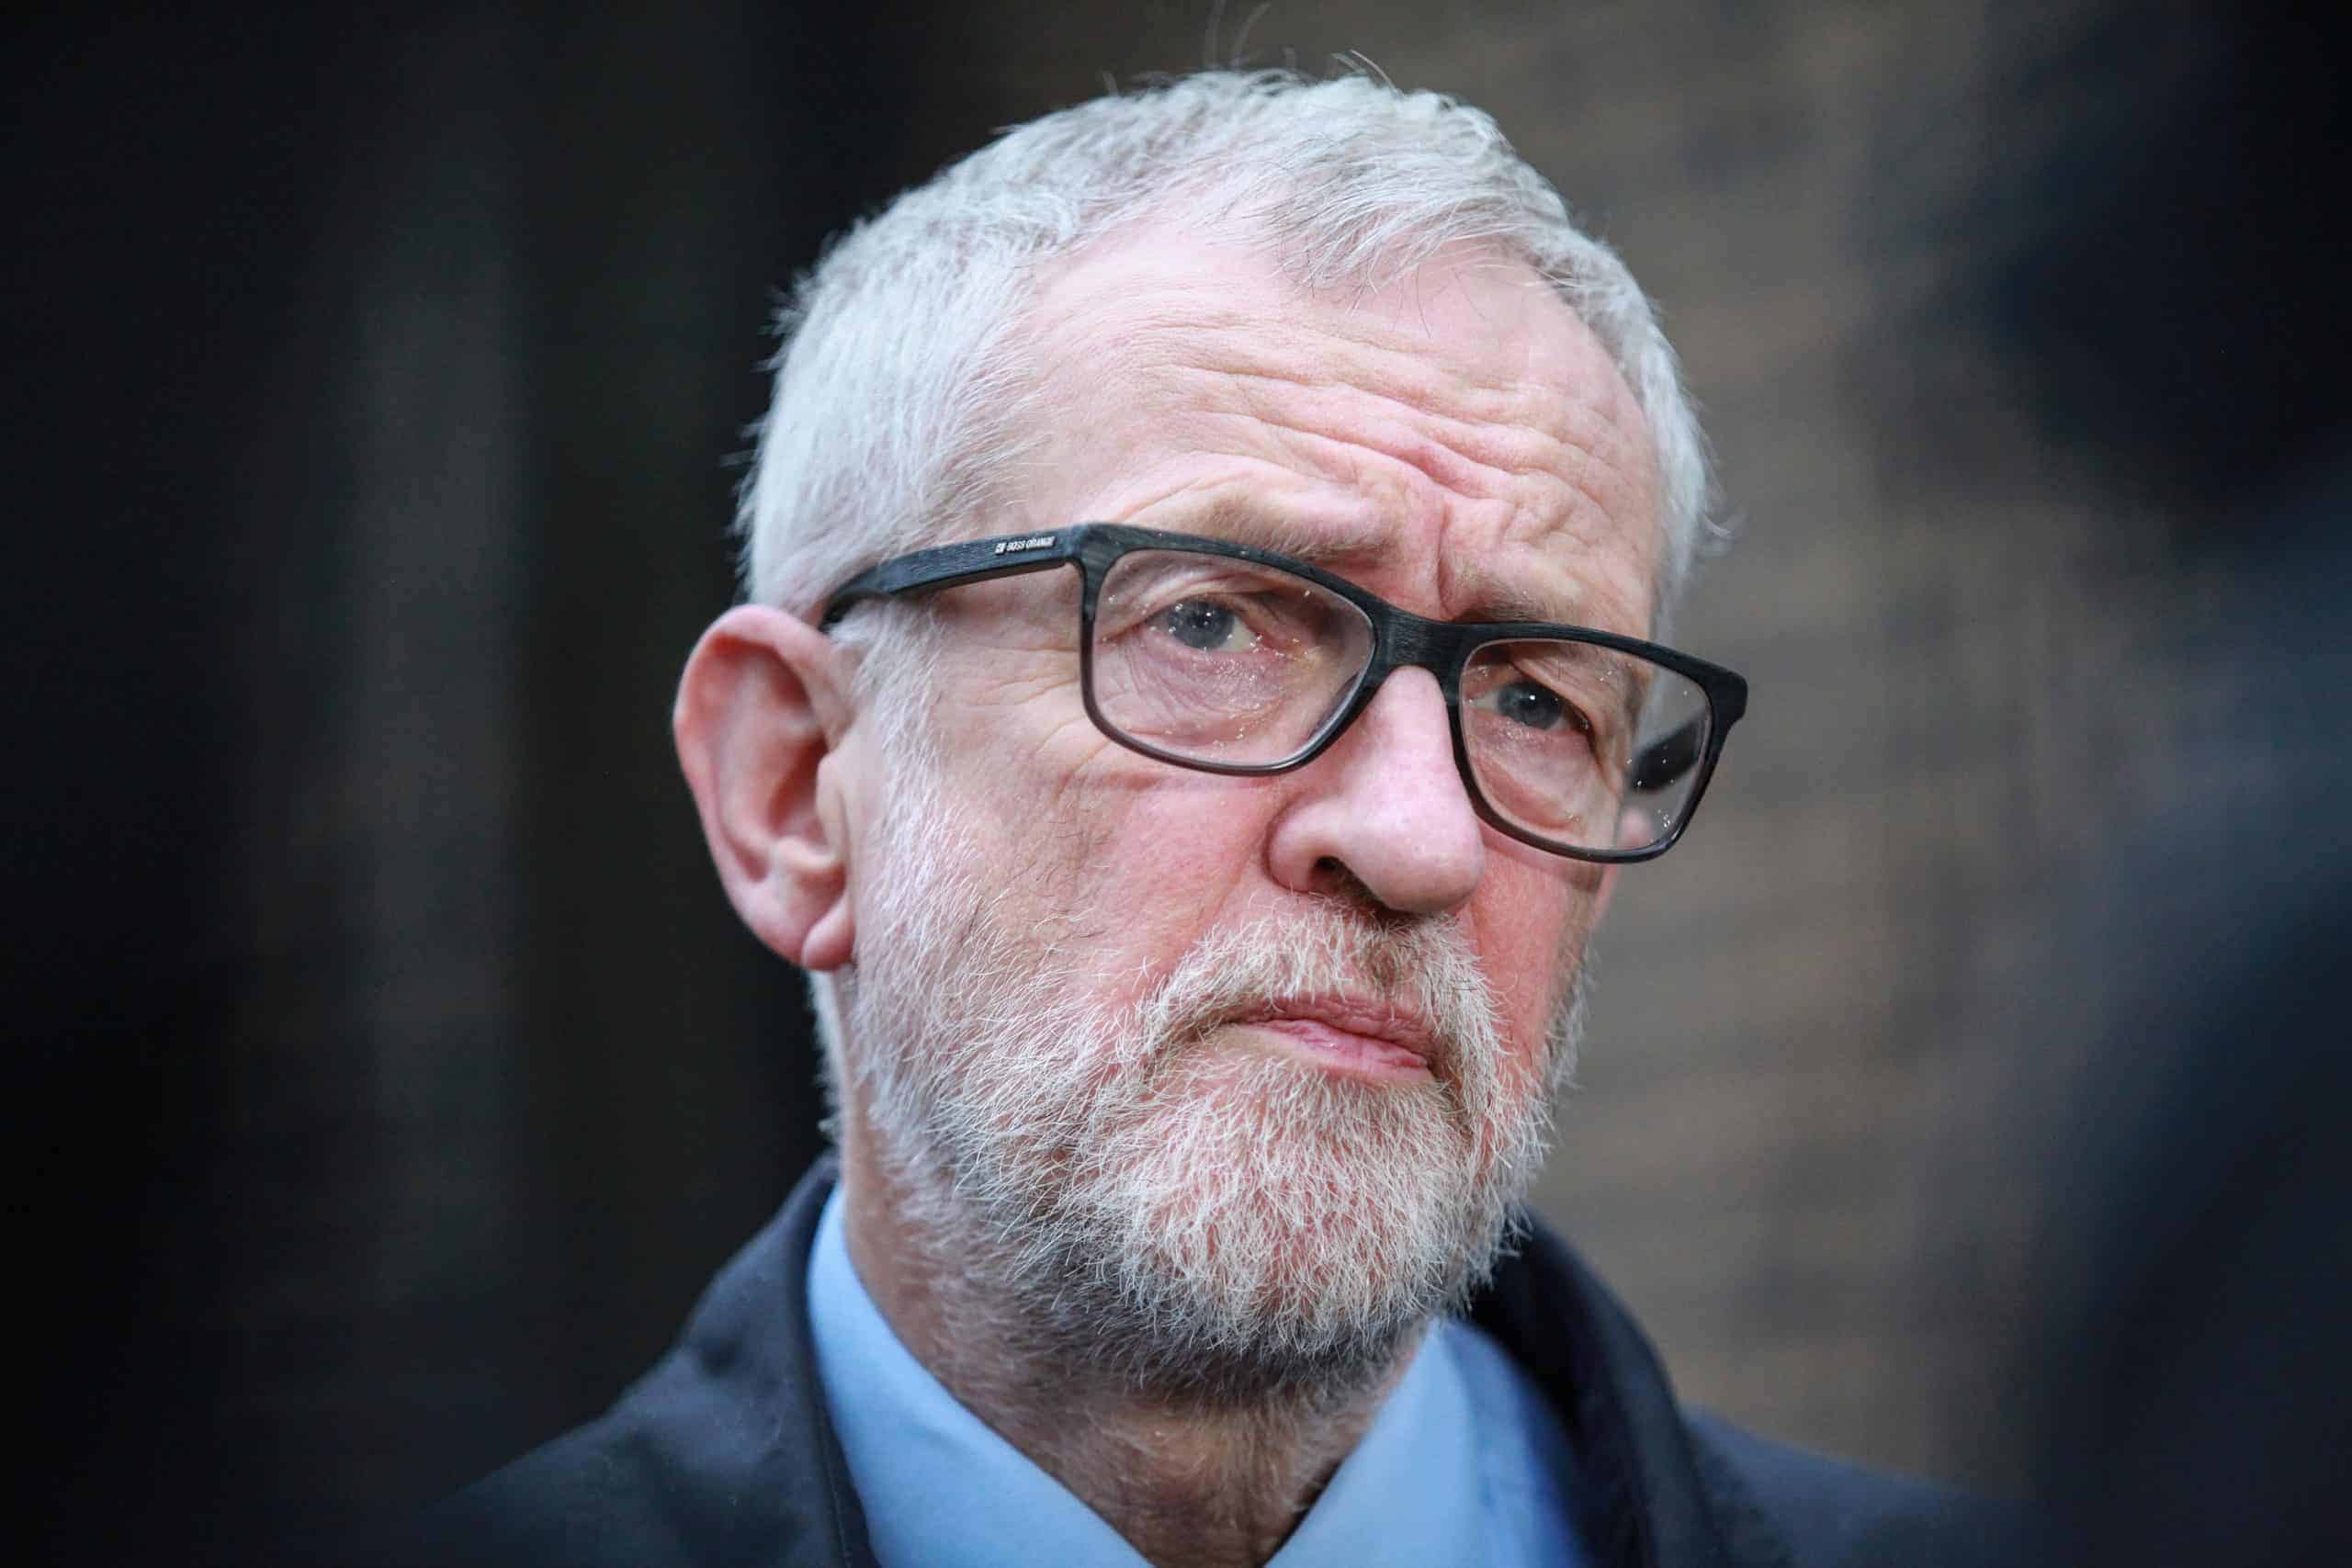 Corbyn: Media crusade ‘disempowered people’ during elections